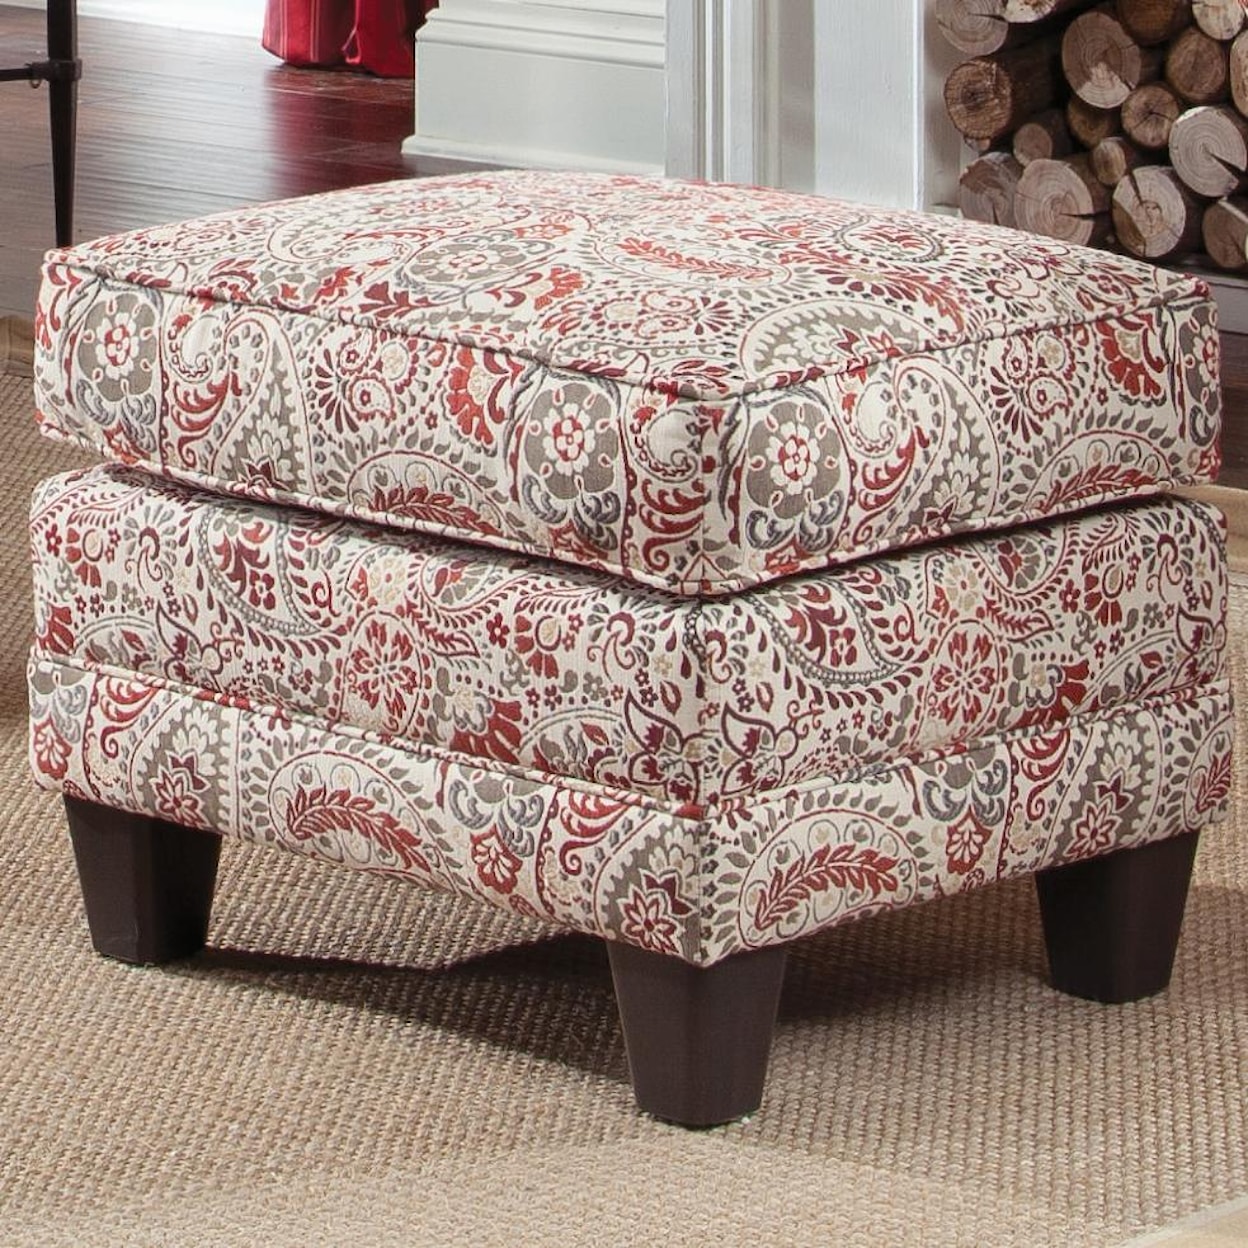 Smith Brothers 397 Upholstered Ottoman